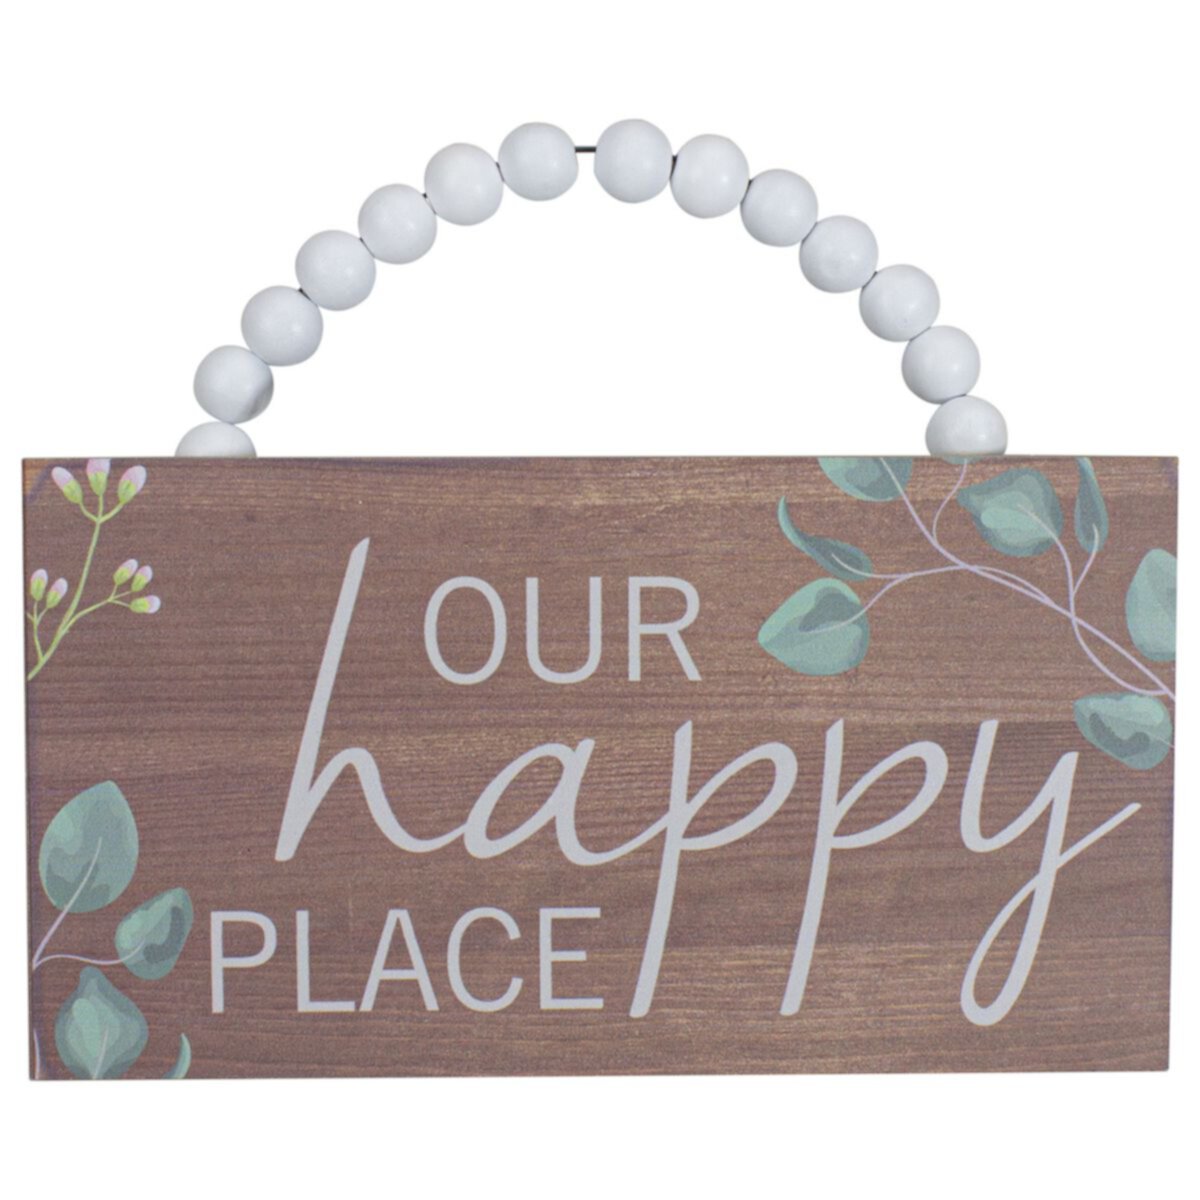 Beaded Hanger &#34;Our Happy Place&#34; Wall Plaque Art Decor 7.75&#34; Christmas Central